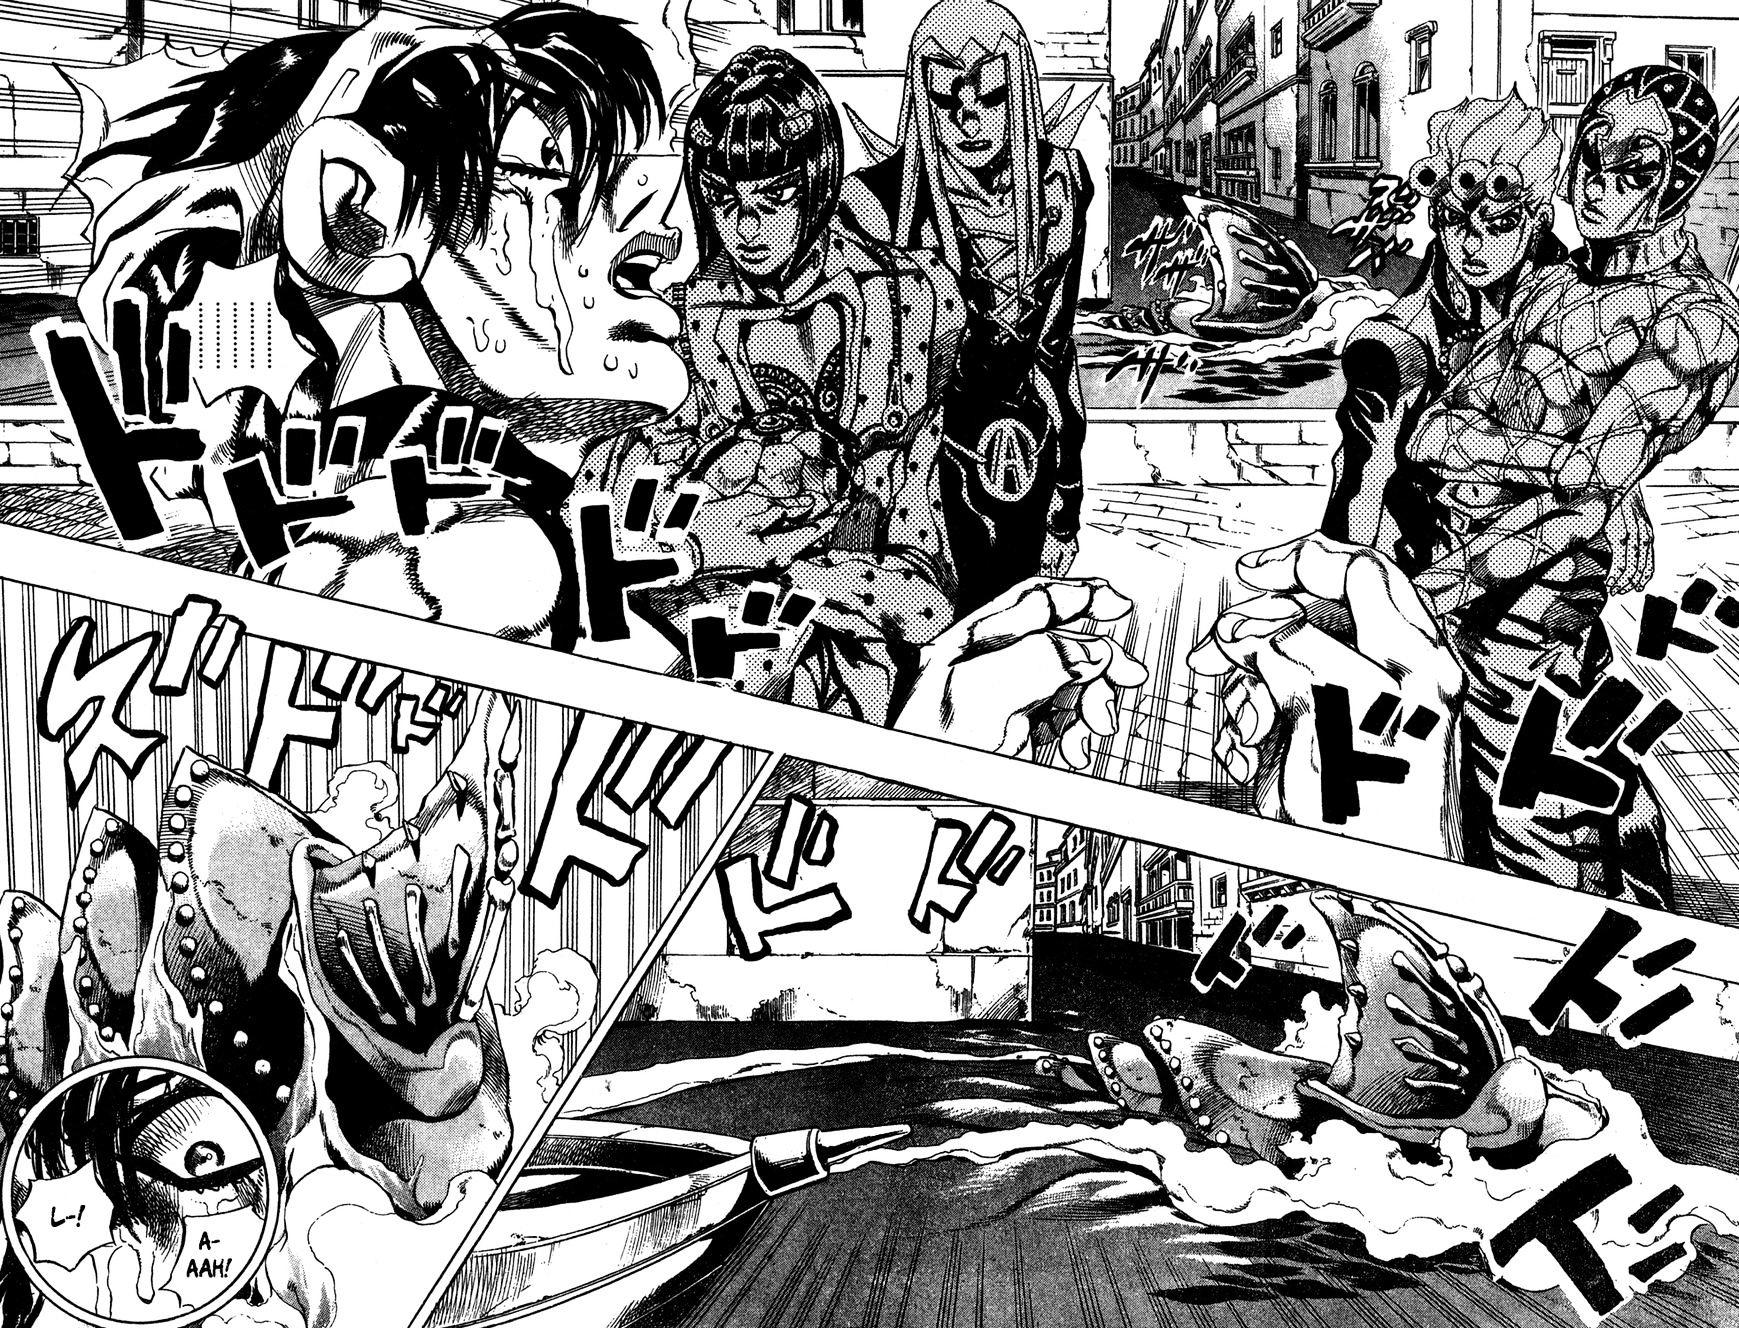 Jojo's Bizarre Adventure Vol.56 Chapter 526 : Clash And Taking Head - Part 2 page 16 - 